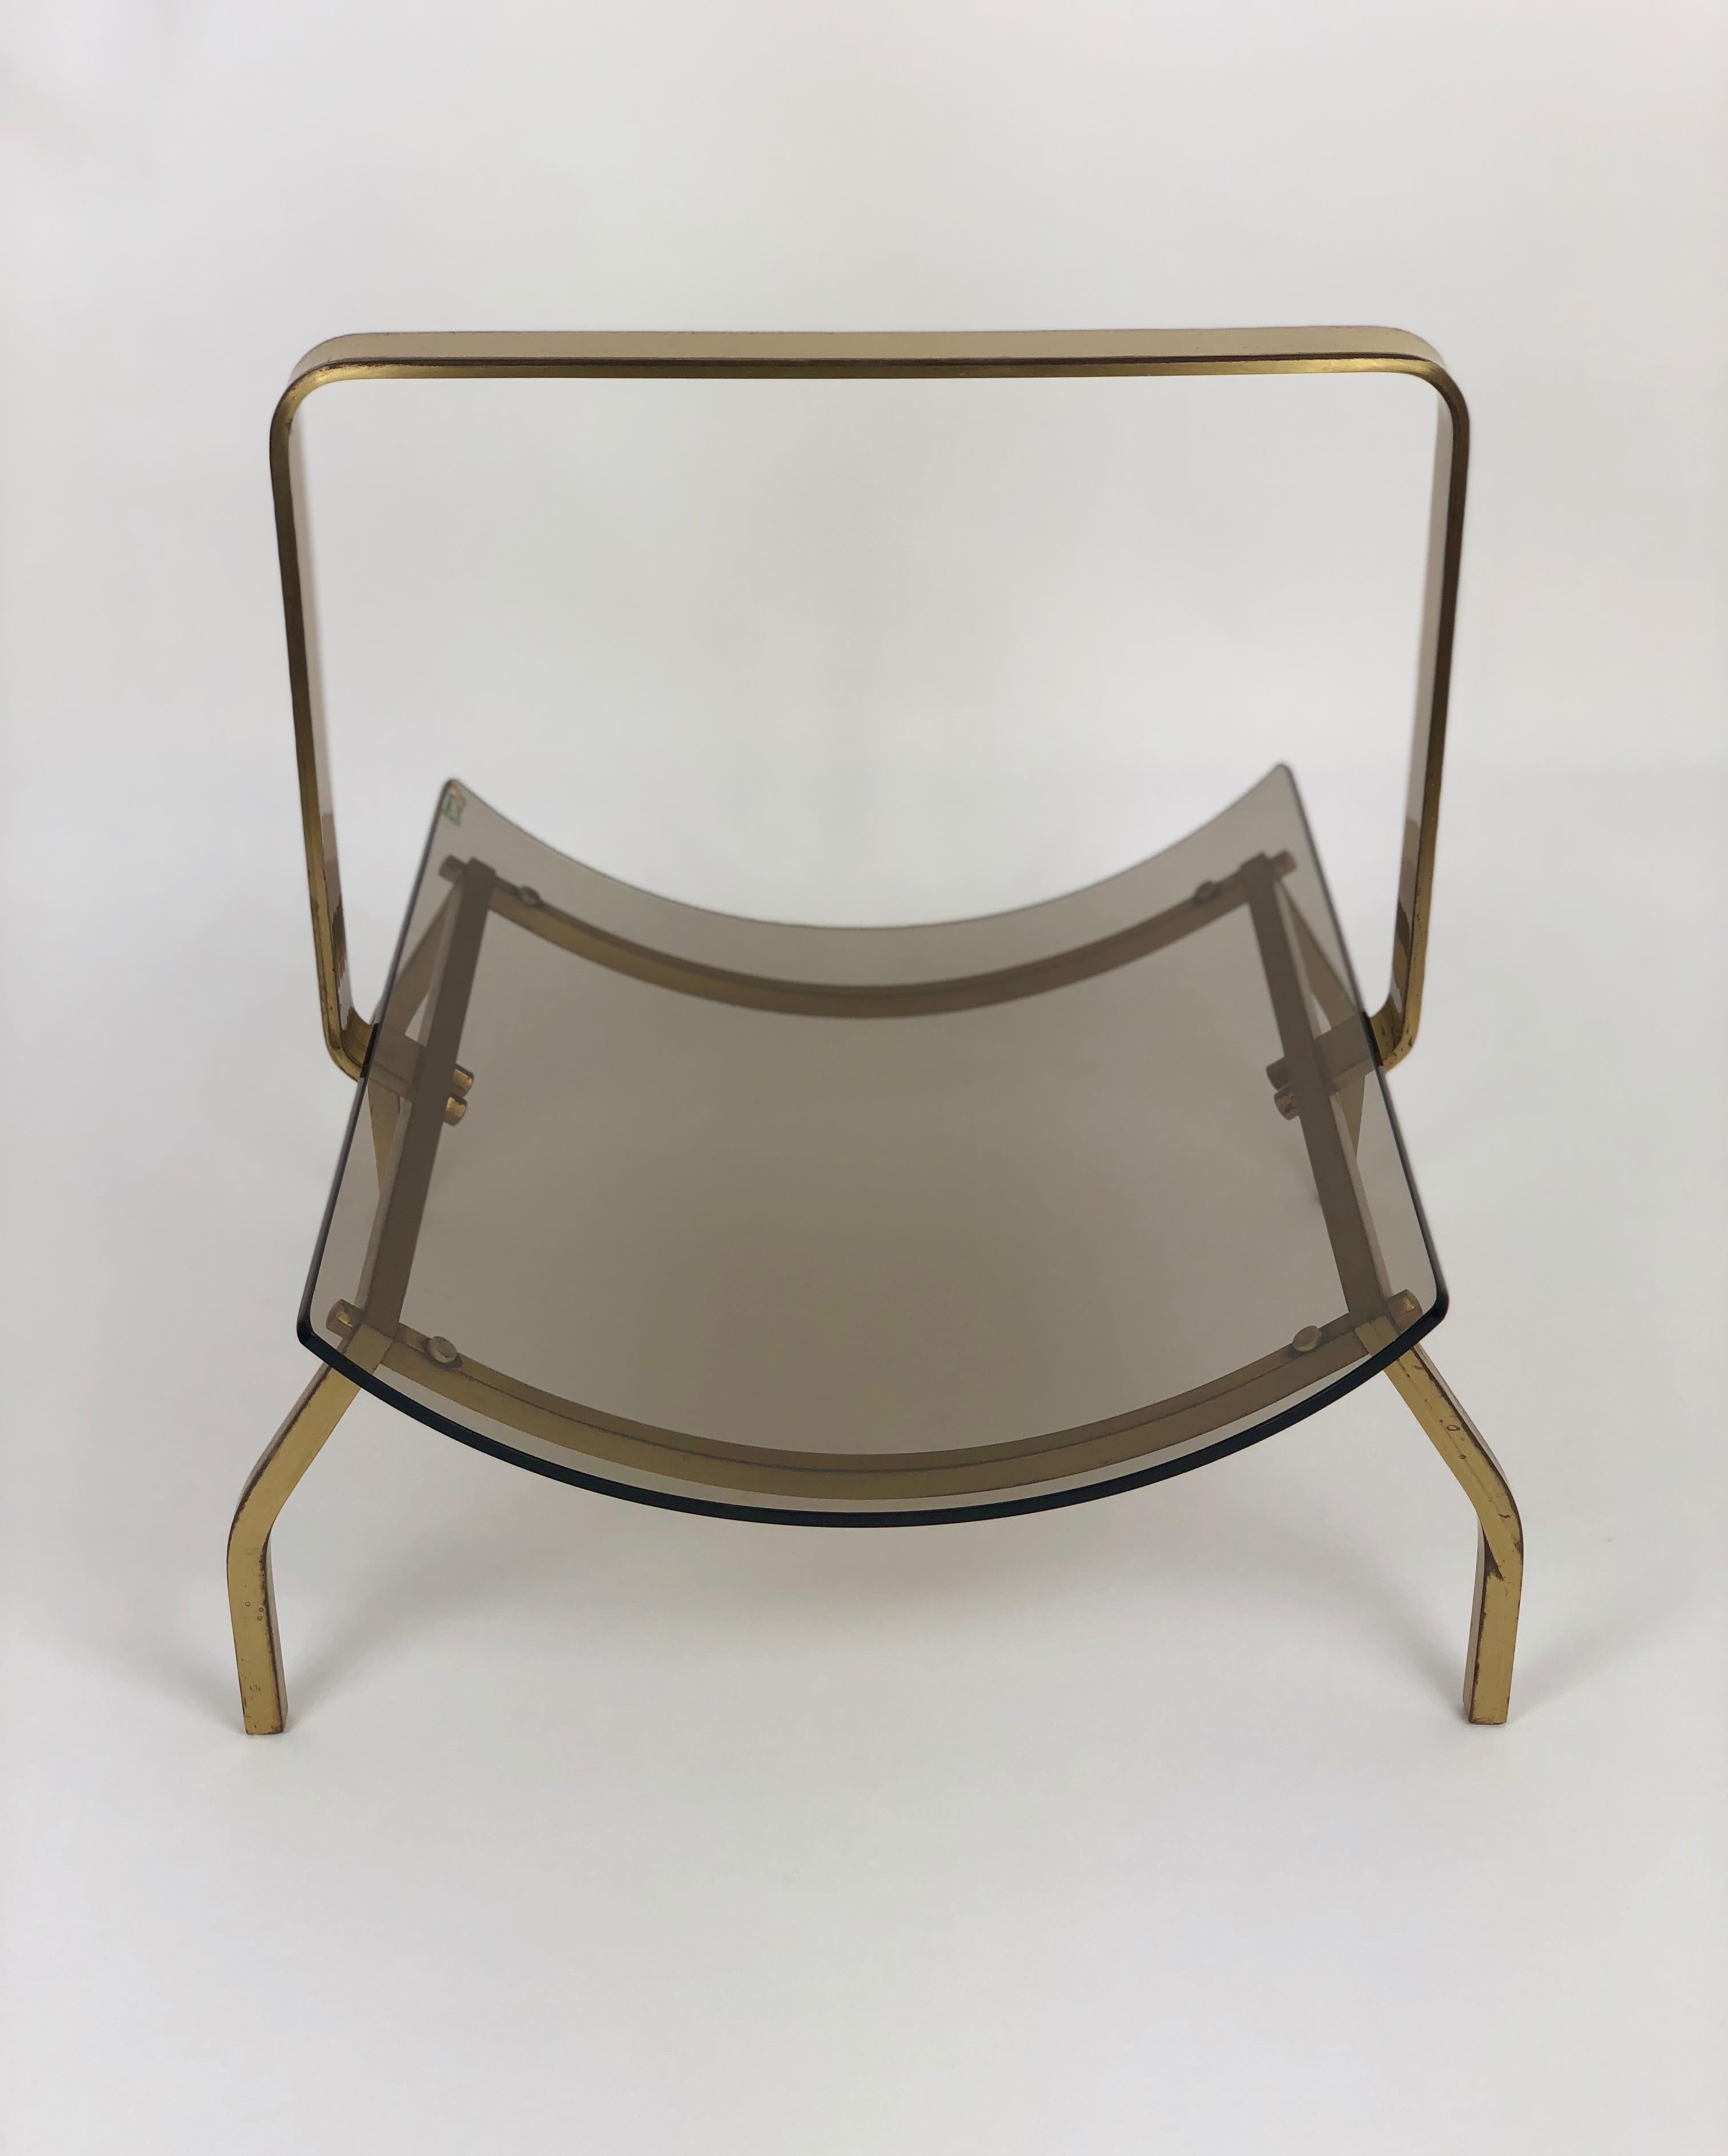 A chic magazine holder comprising a curved smoked glass shelf held within a brass frame with an integral handle. By Fontana Arte, Italy, circa 1960.